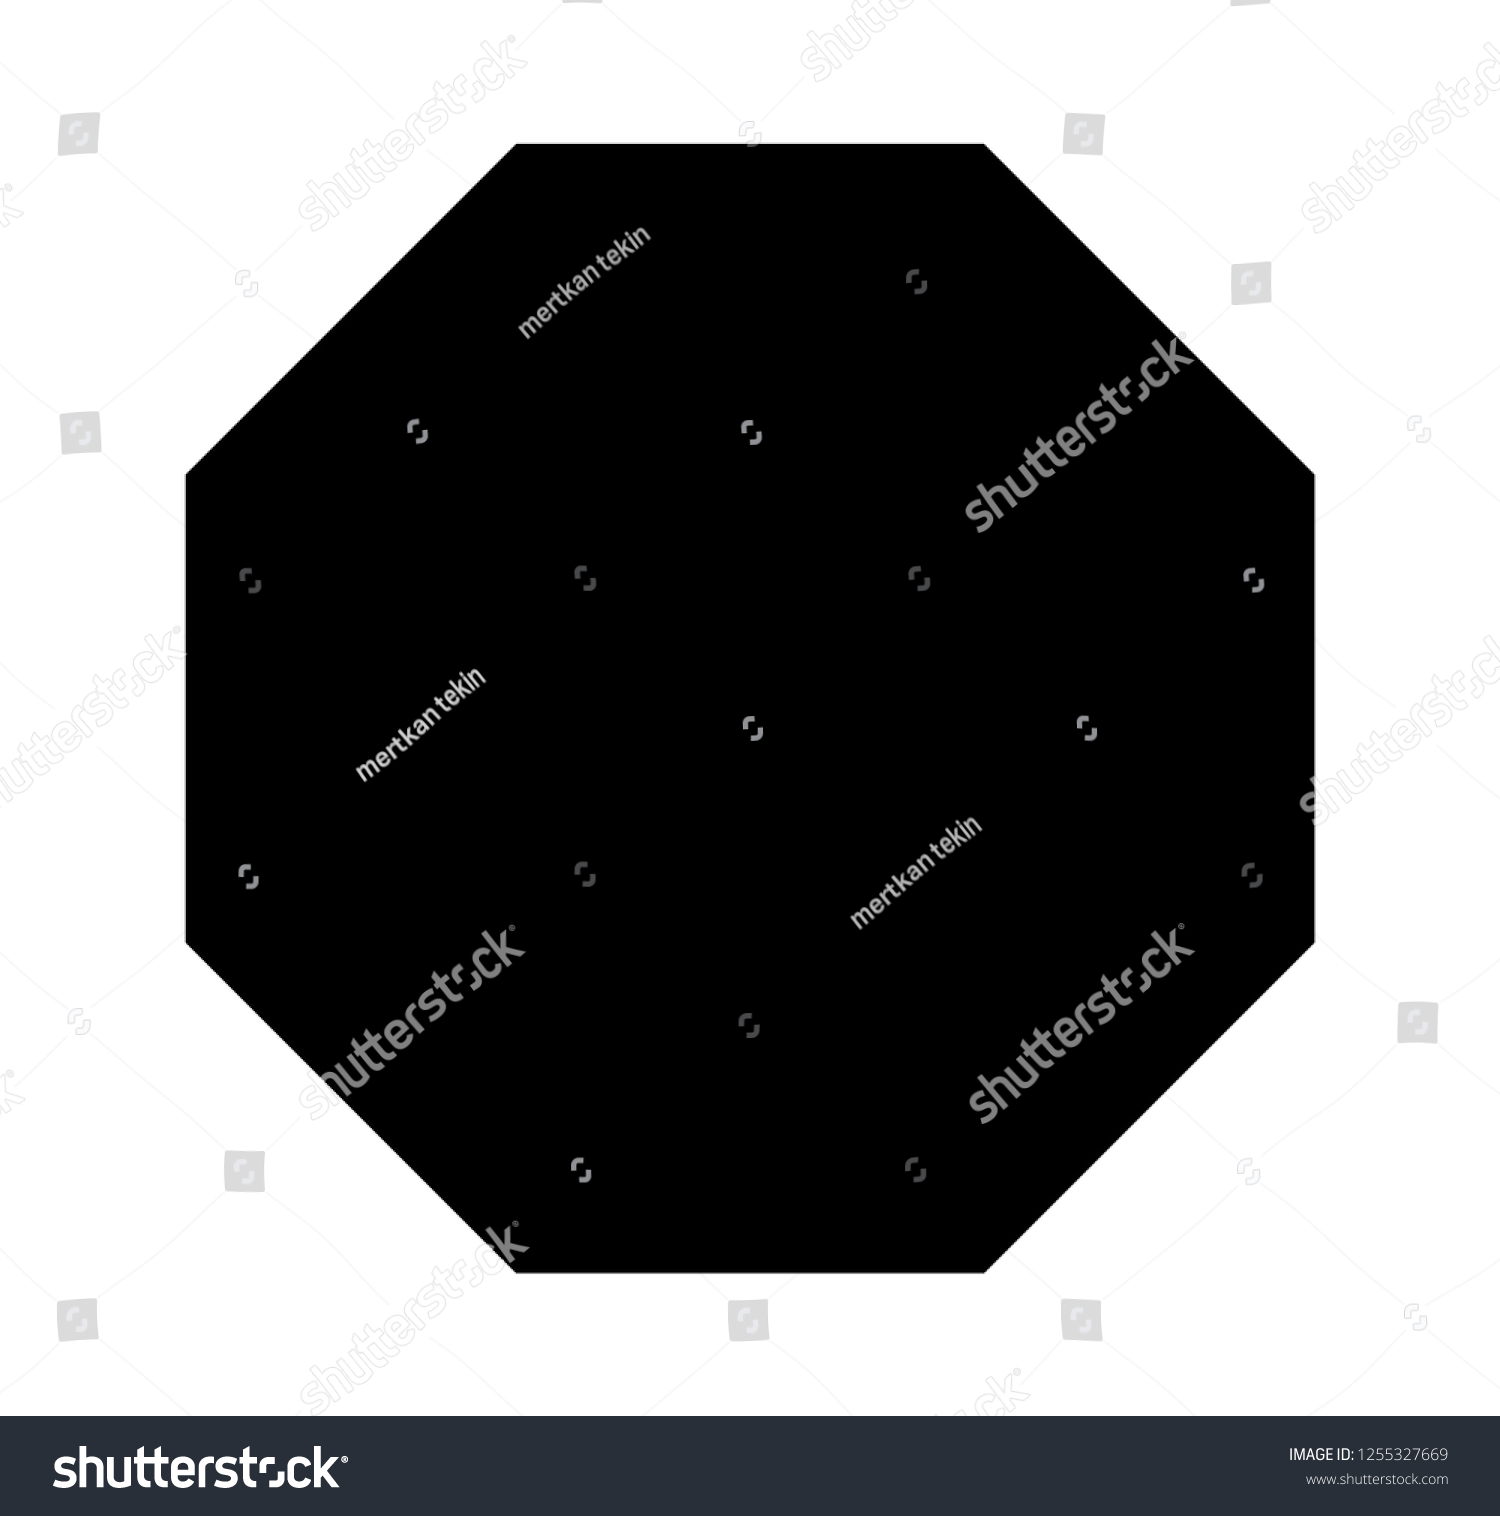 11 point octagon shapes for photoshop cc free download